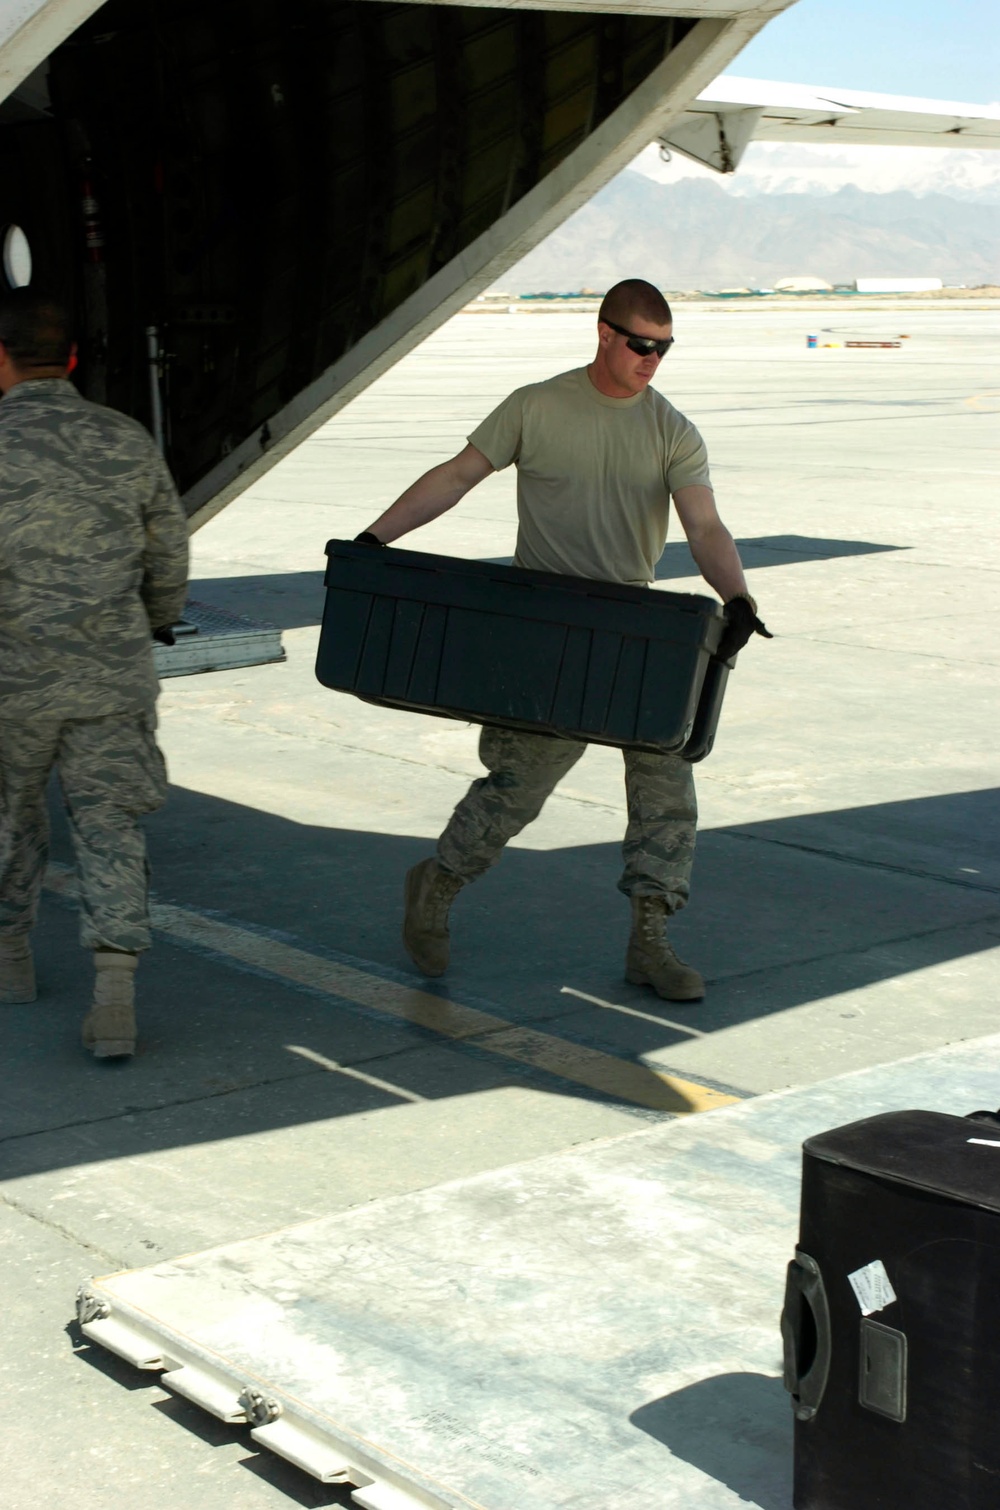 53rd Movement Control Battalion delivers mail, supplies across Afghanistan